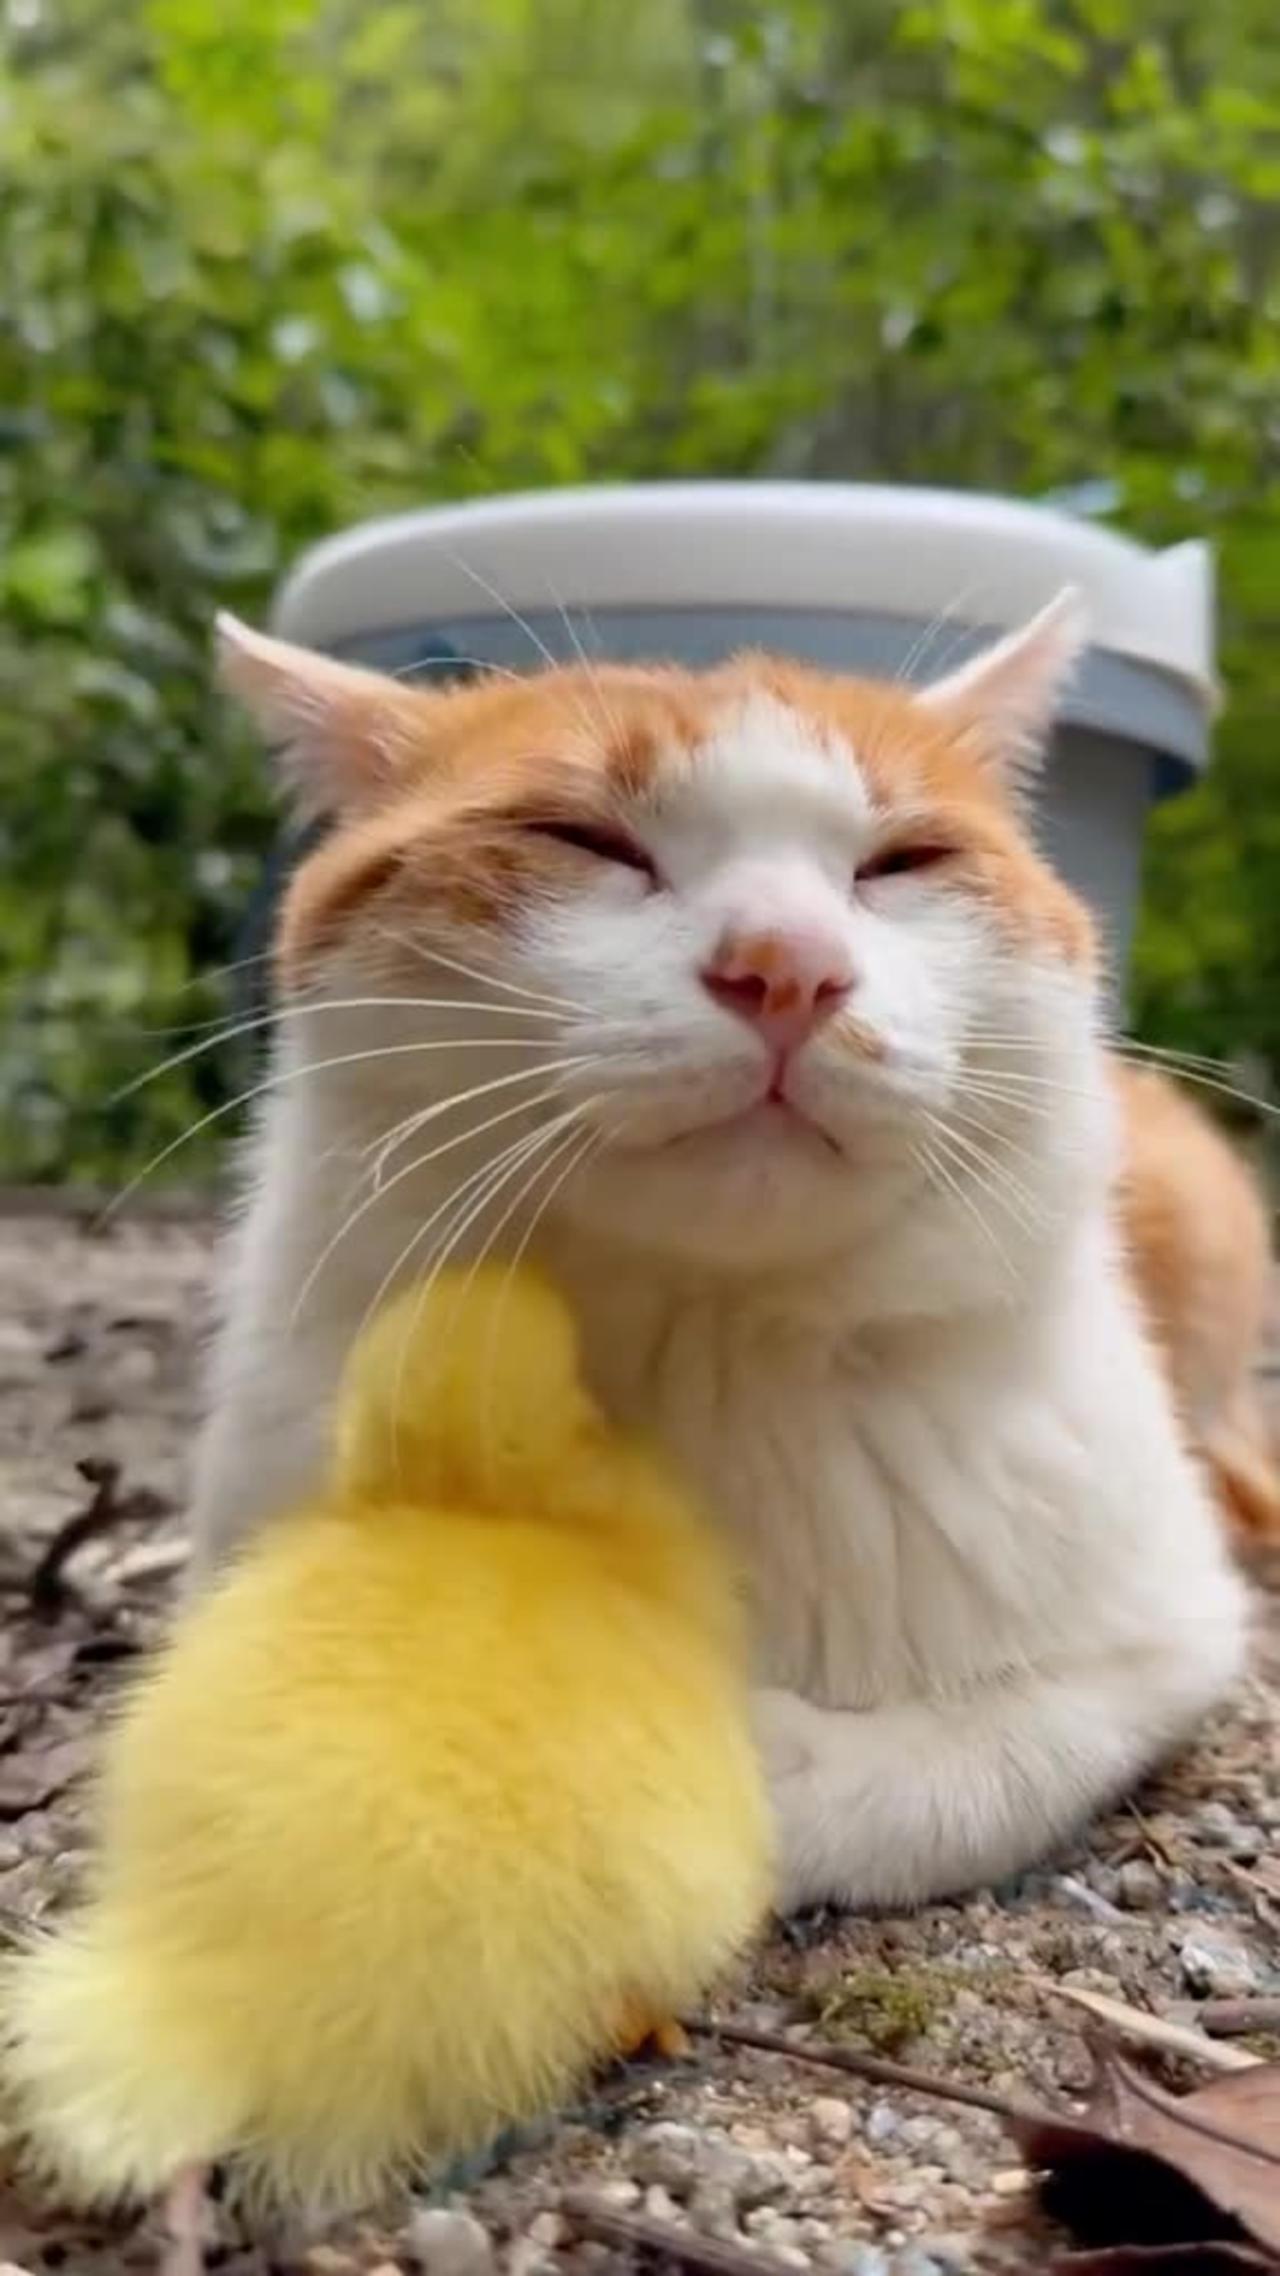 They are best friends cat and duck